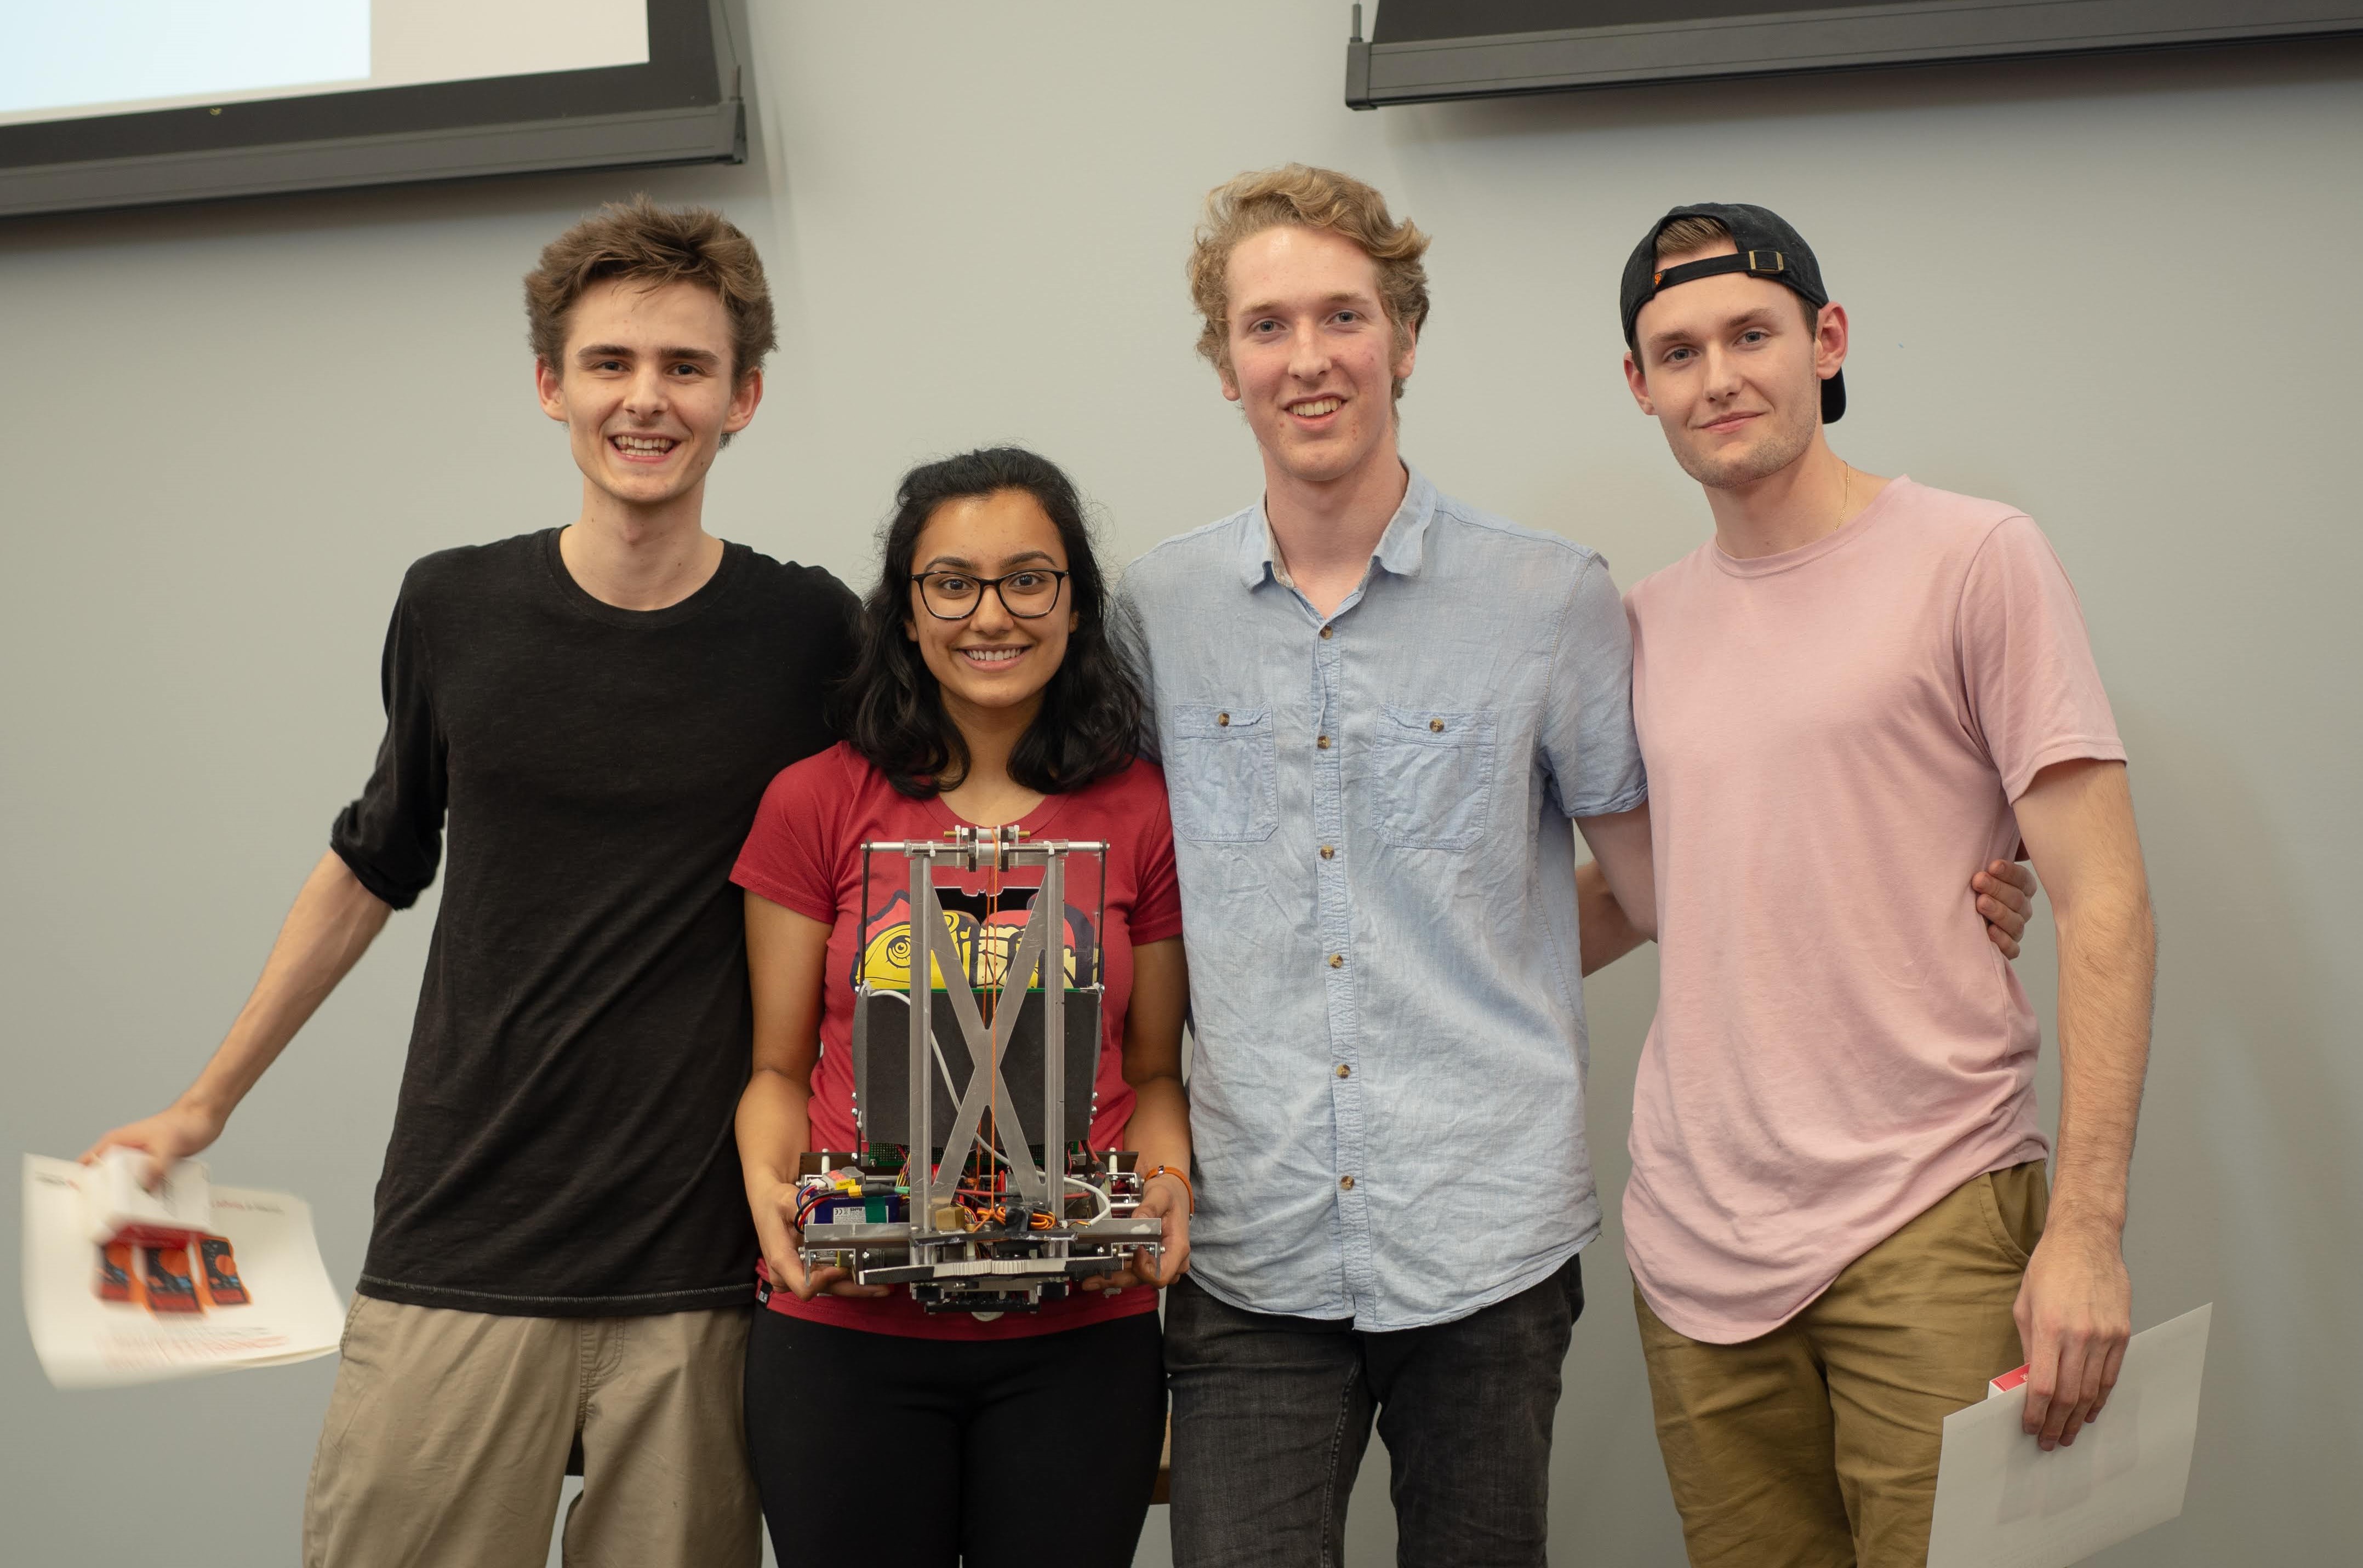 Batman, the winning robot of the 2019 Eng Phys Robot Competition